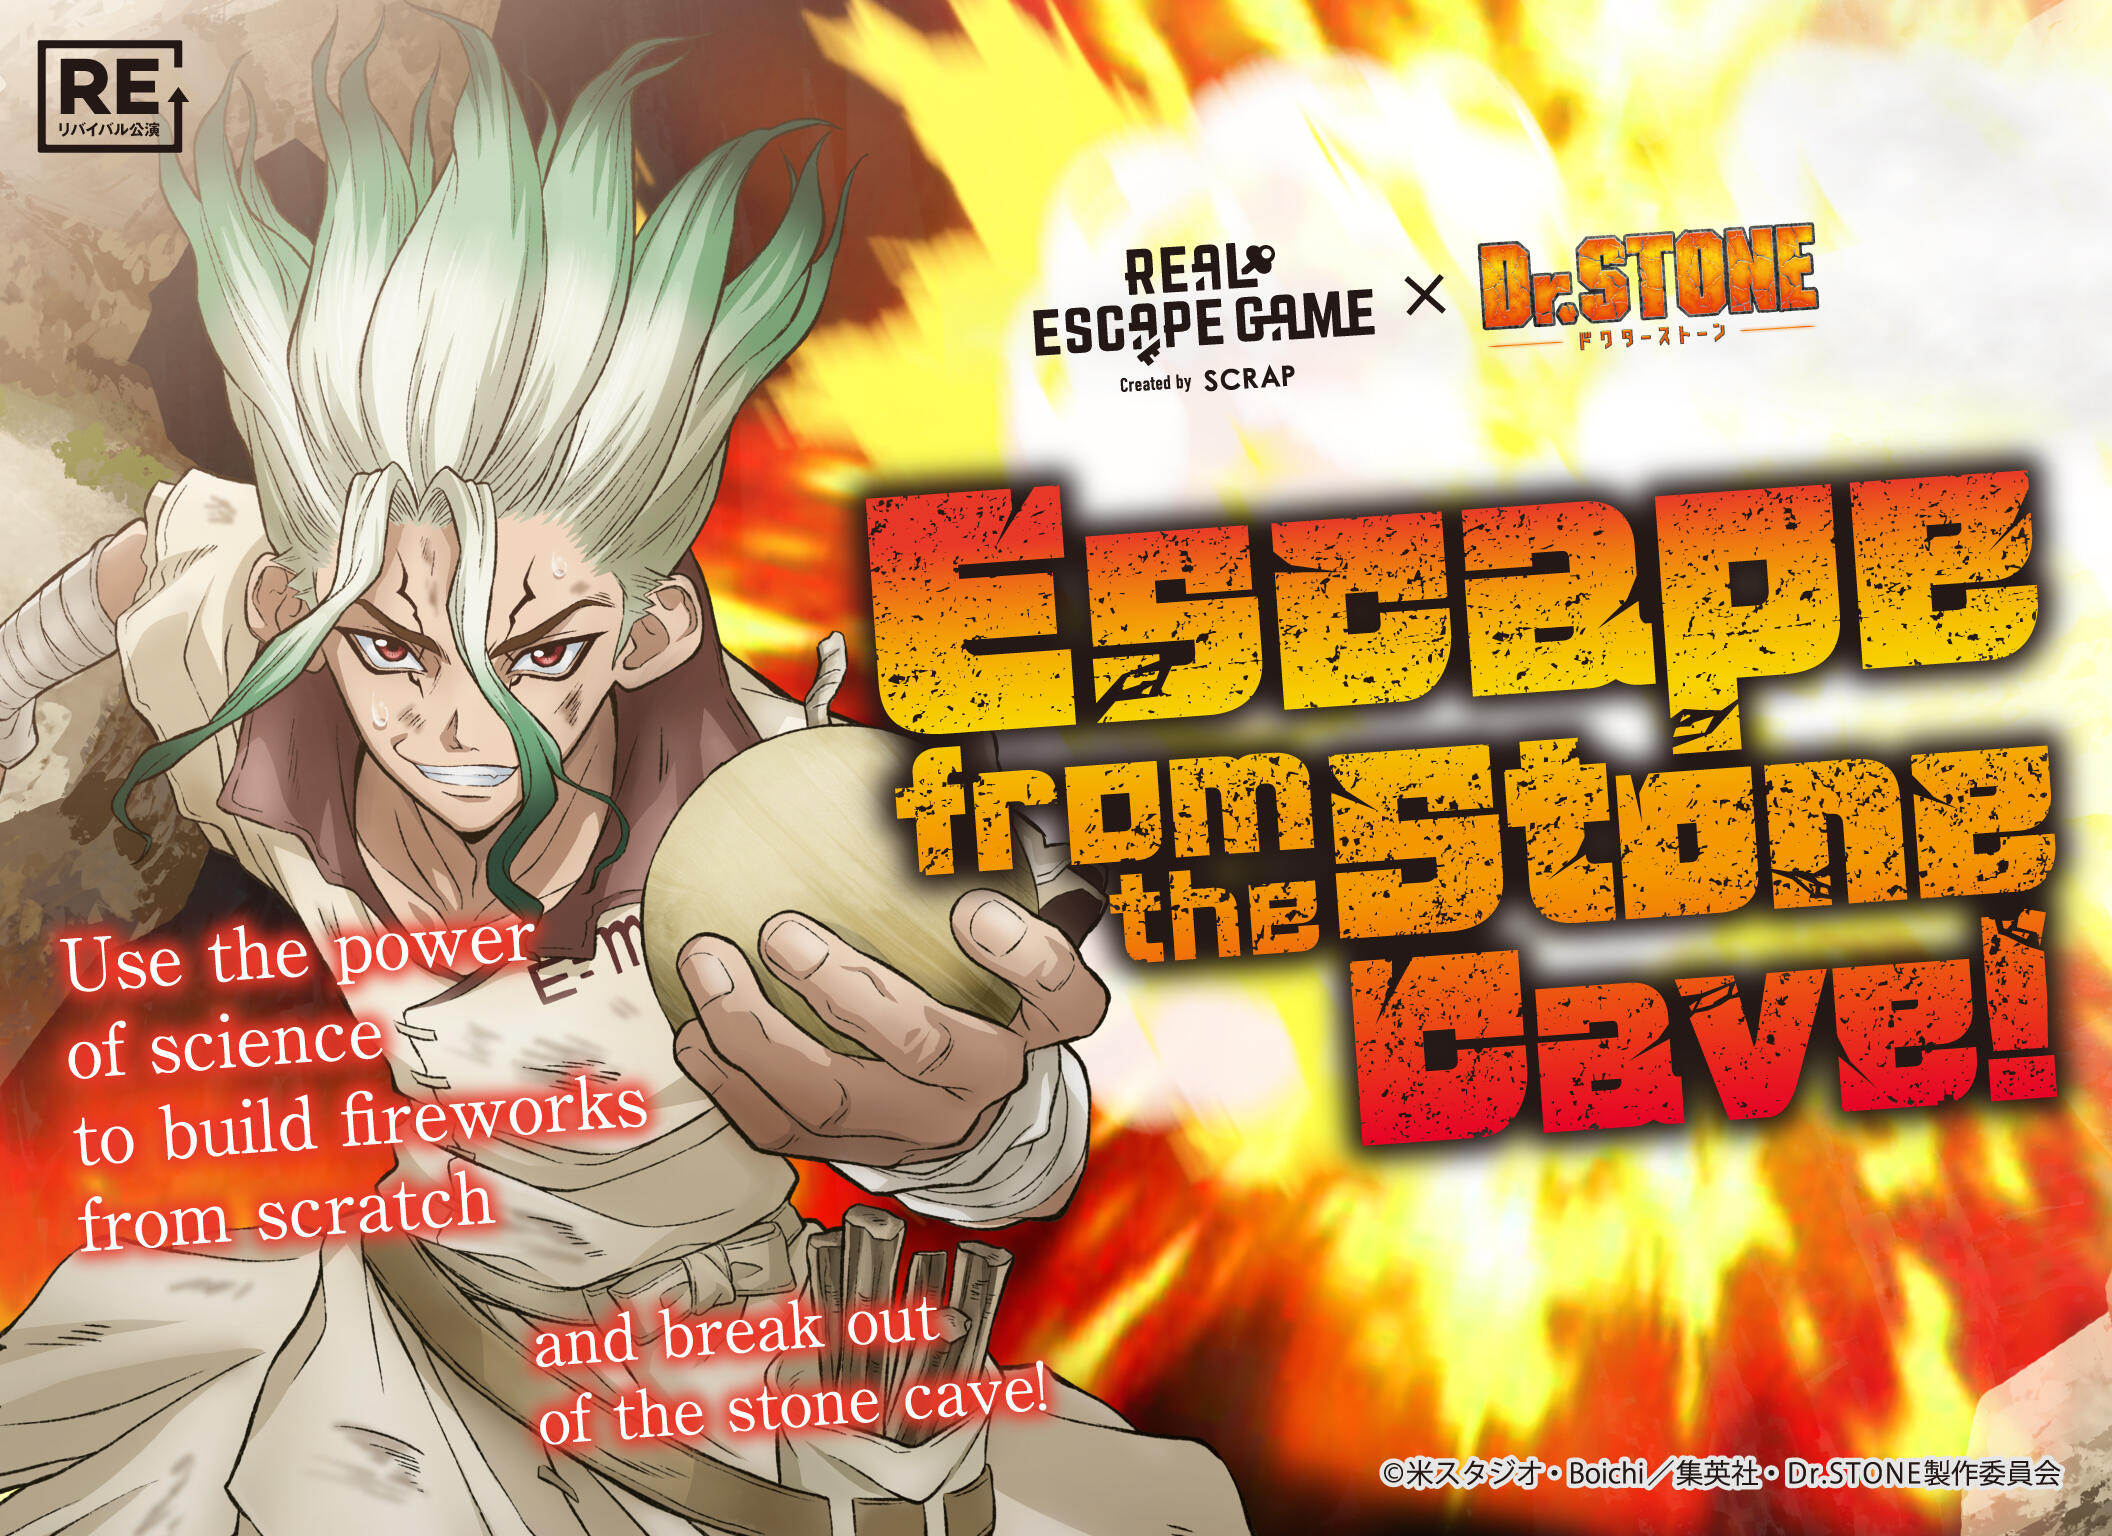 New era of immersive events by SCRAP, starting with Dr. Stone